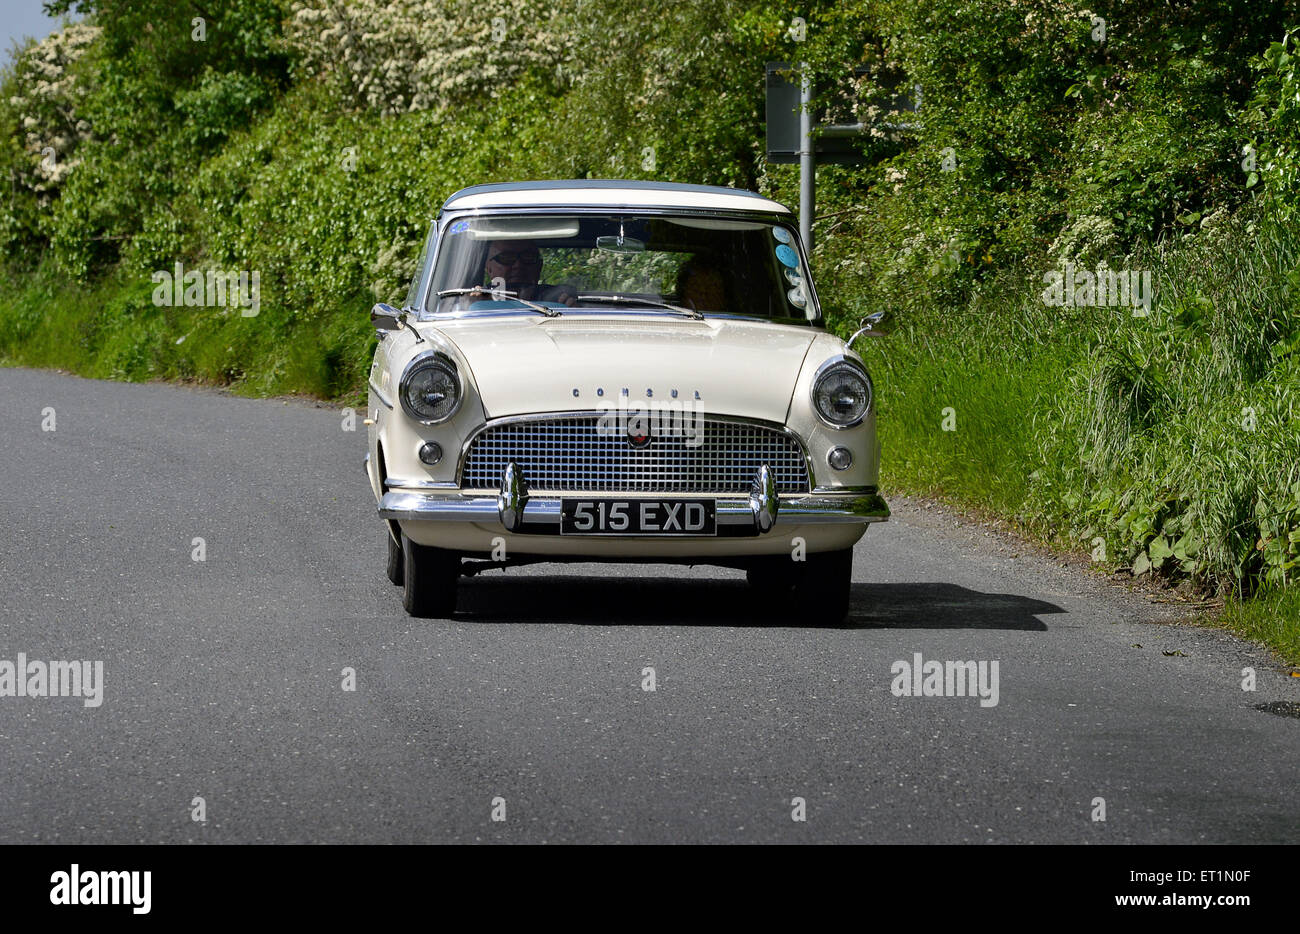 1960 Ford Consul Mark II Berline classic car on country road, Burnfoot, comté de Donegal, Irlande Banque D'Images